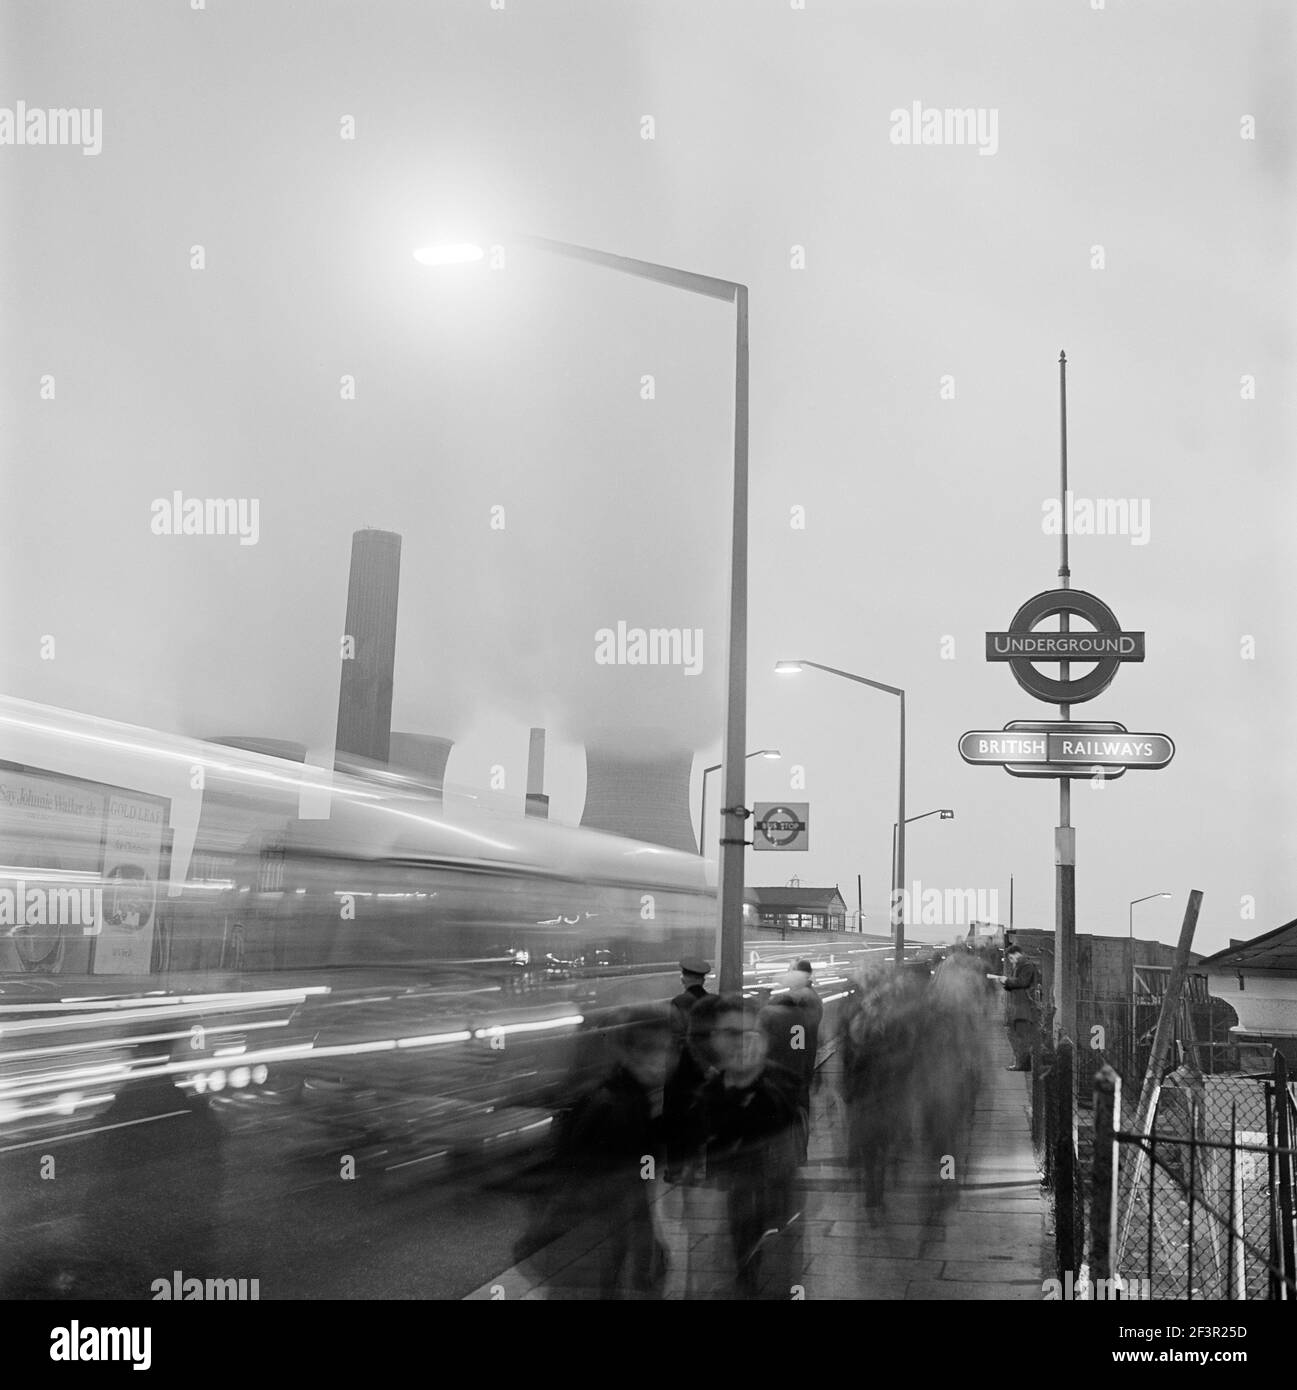 HARLESDEN, Greater London. A street scene with traffic and pedestrians passing a bus stop by a London Underground station sign in Harlesden at night, Stock Photo